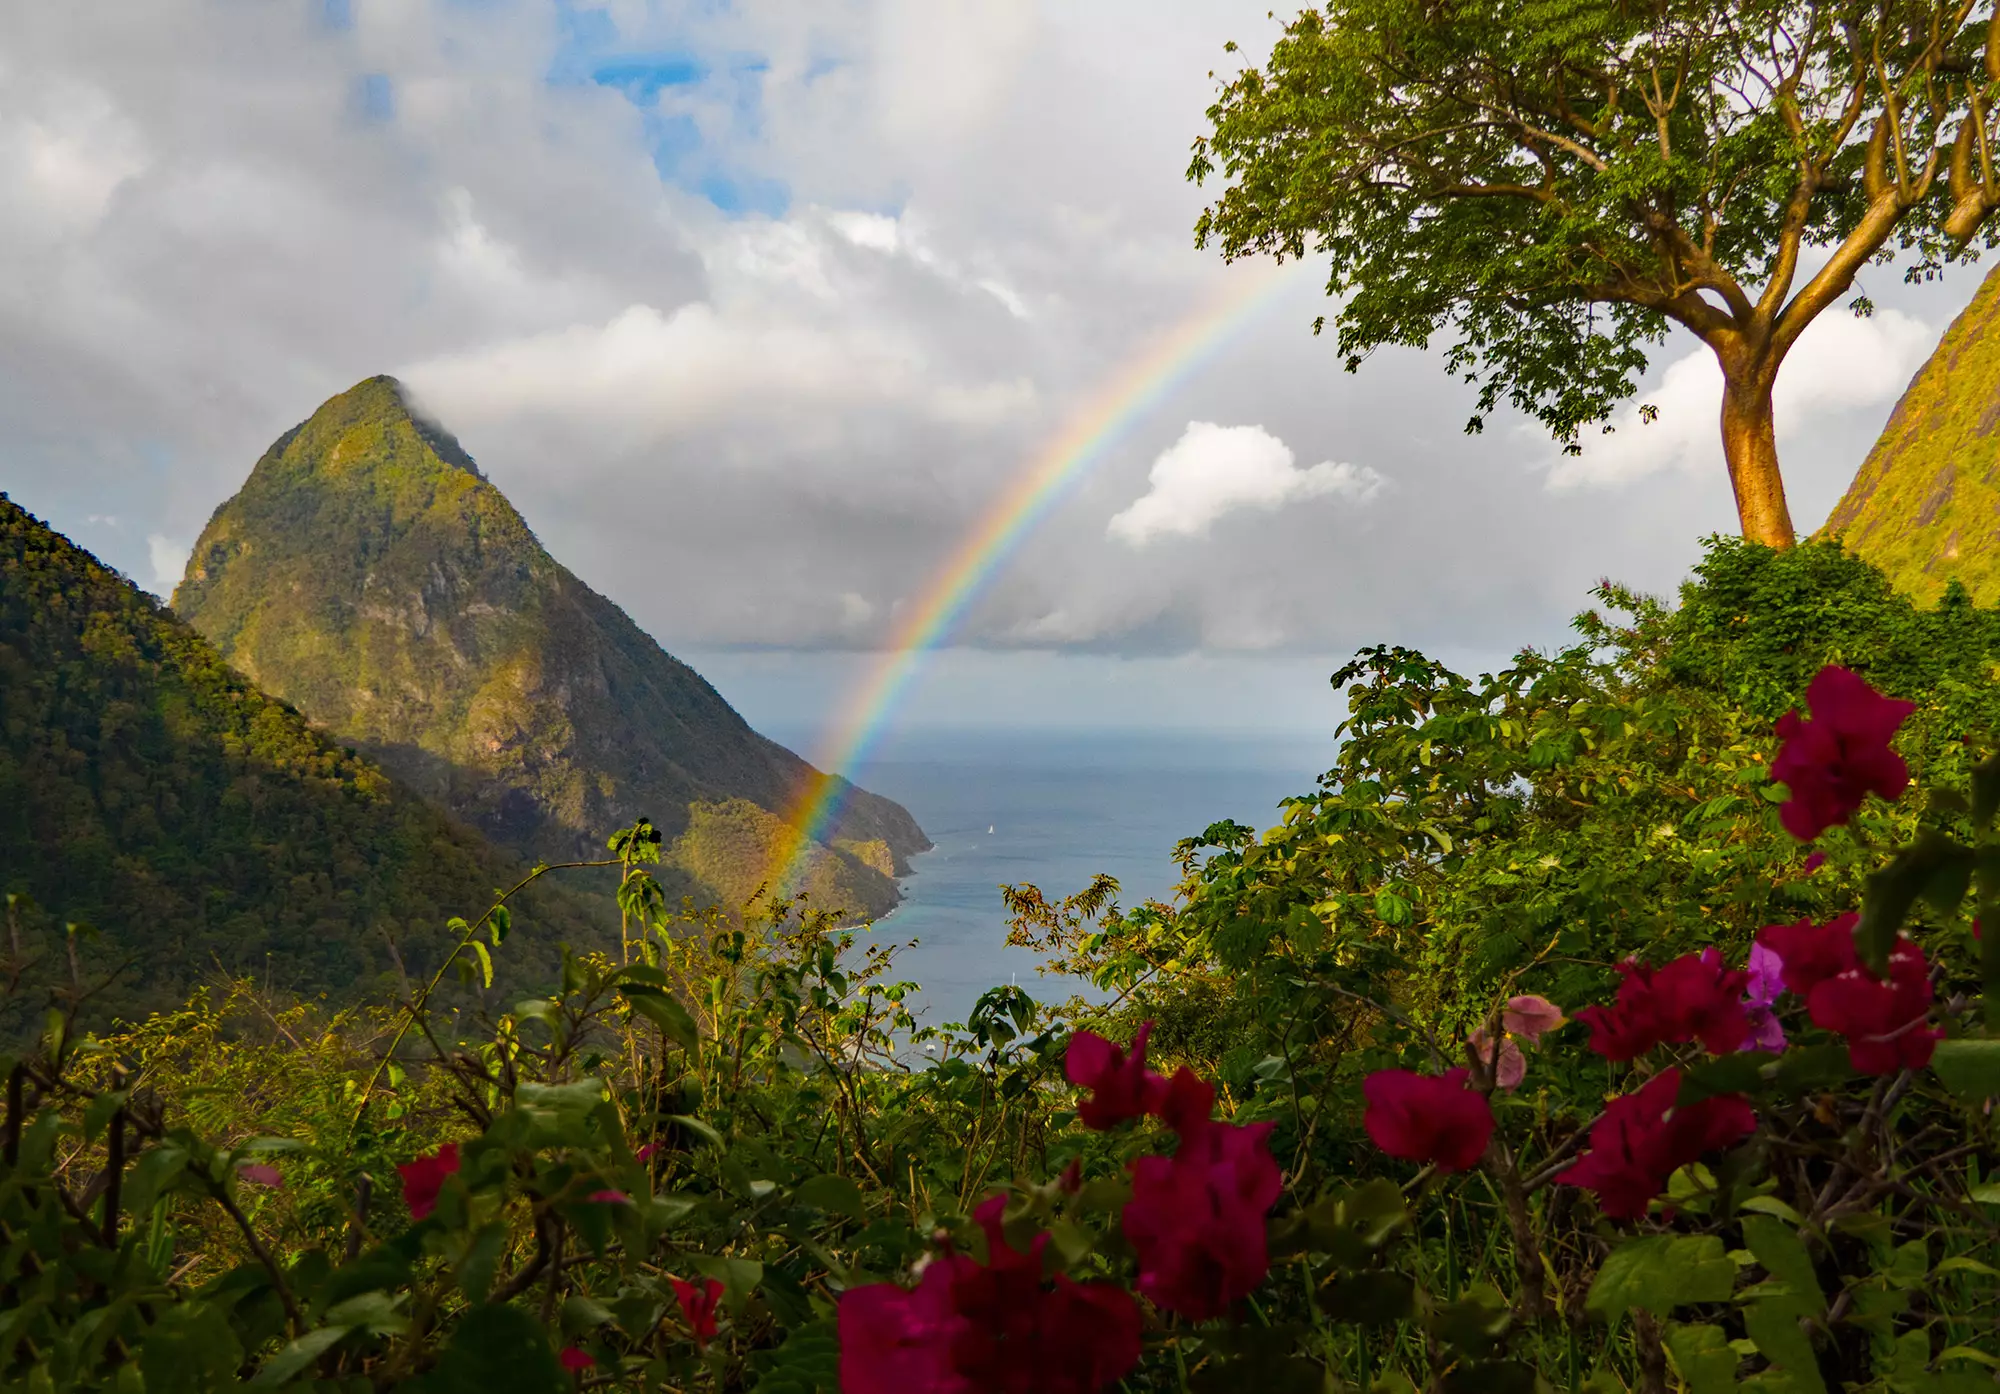 St. Lucia is a beautiful island in the Carribbean - where gay sex is illegal.